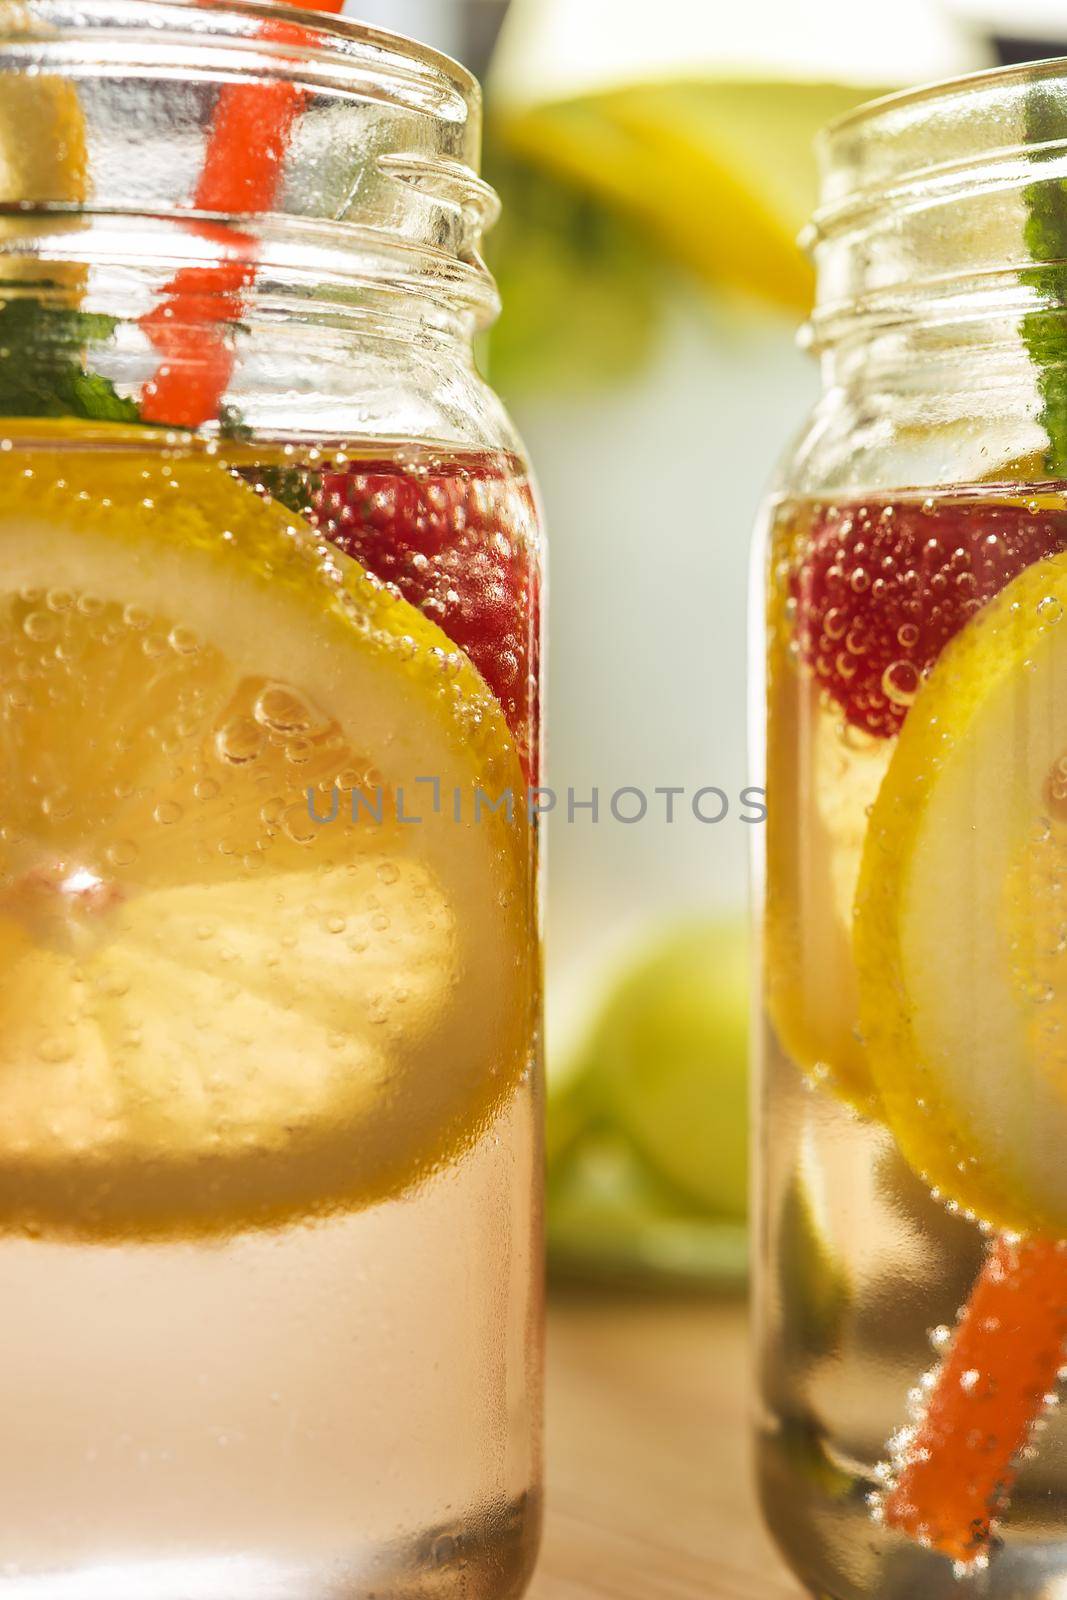 two glass jars and a bottle lit by sunlight with refreshing cold lemonade water, lemon slices, red berries, mint leaves and drink canes on a wooden table. Summer citrus soda background, vertical photo